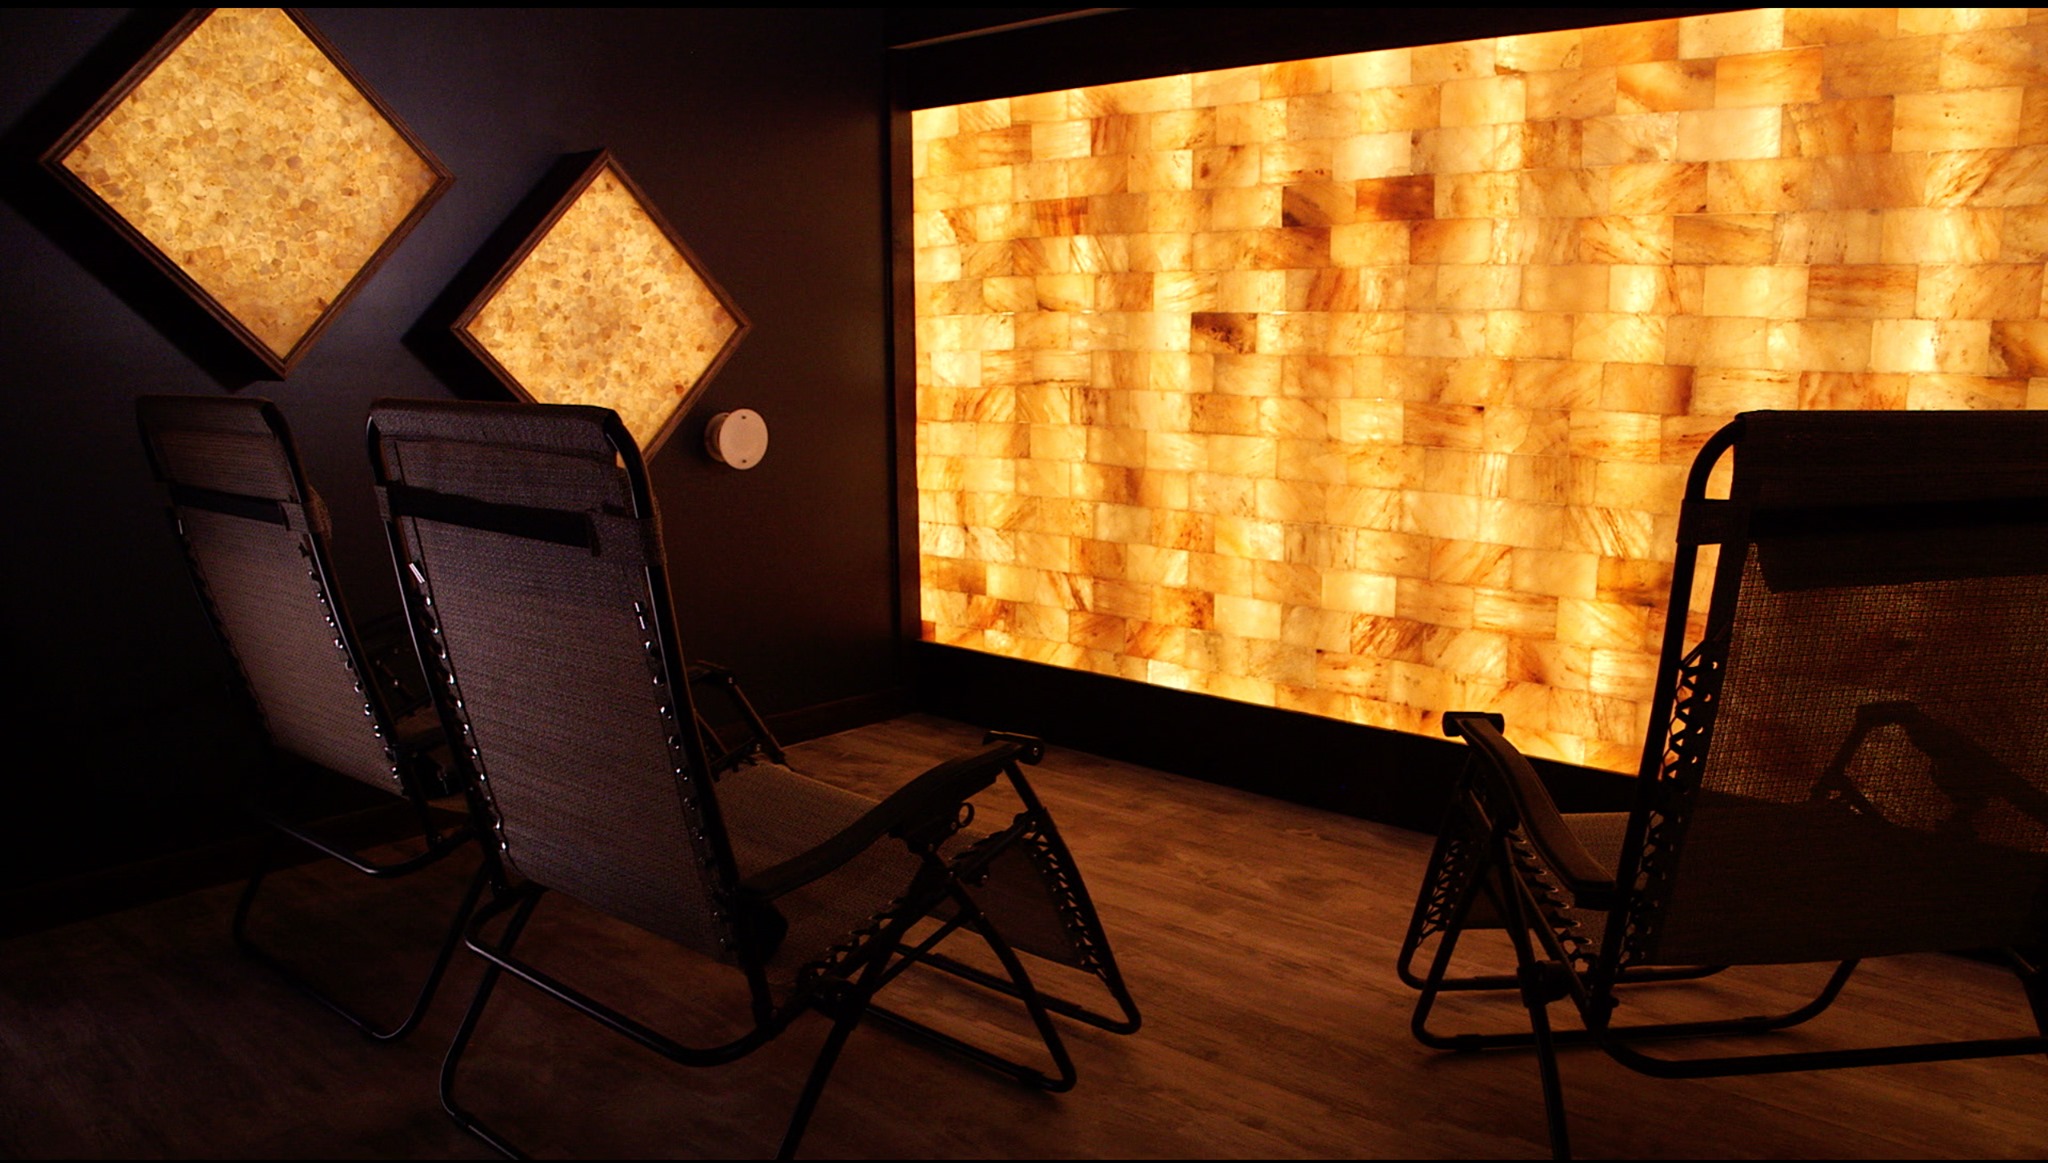 Three Brown Reclining Chairs On A Brown Wooden Floor Facing An Orange Backlit Paneled Salt Wall With Two Diamond Shaped Salt Stone Décor.